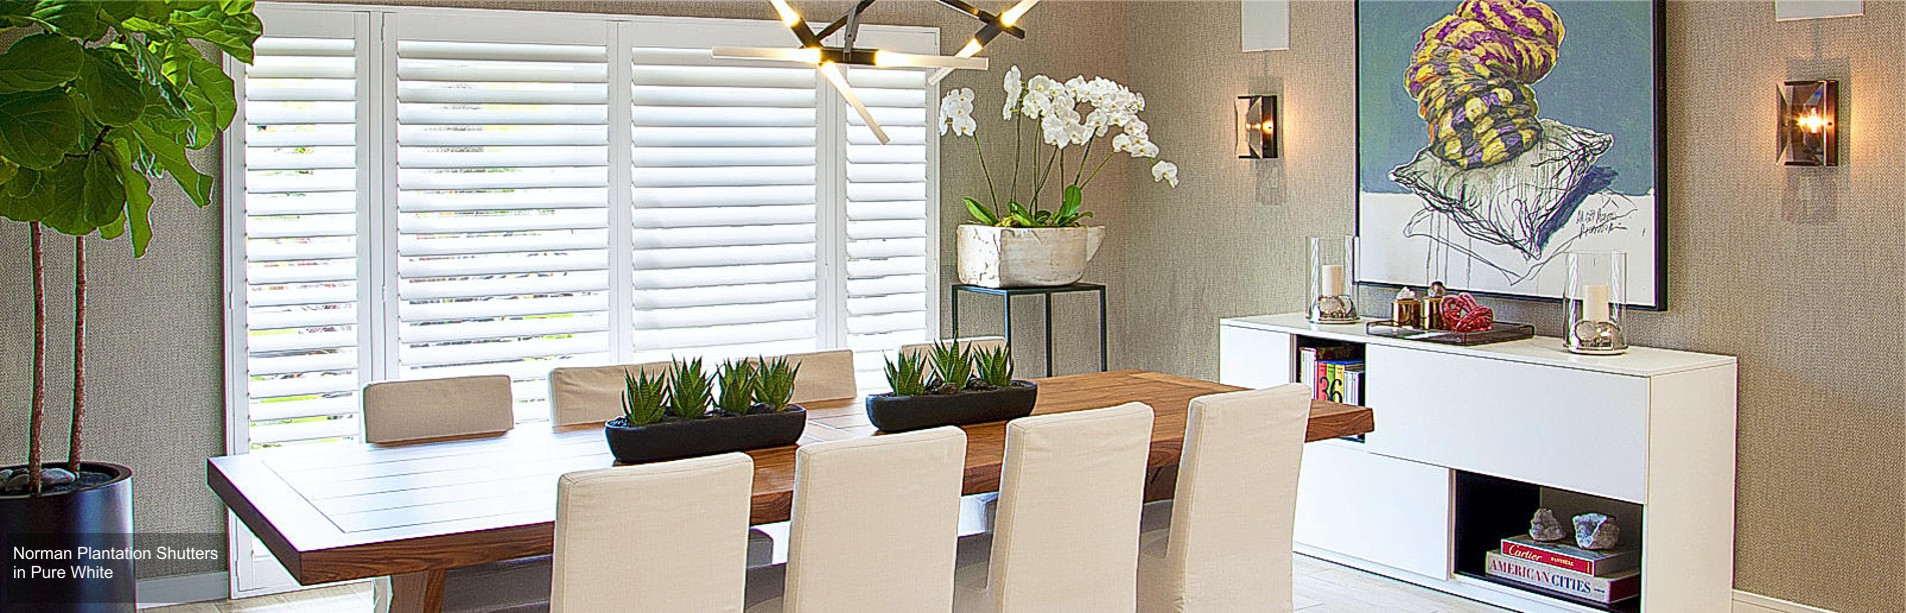 Dining room with Norman plantation shutters in white